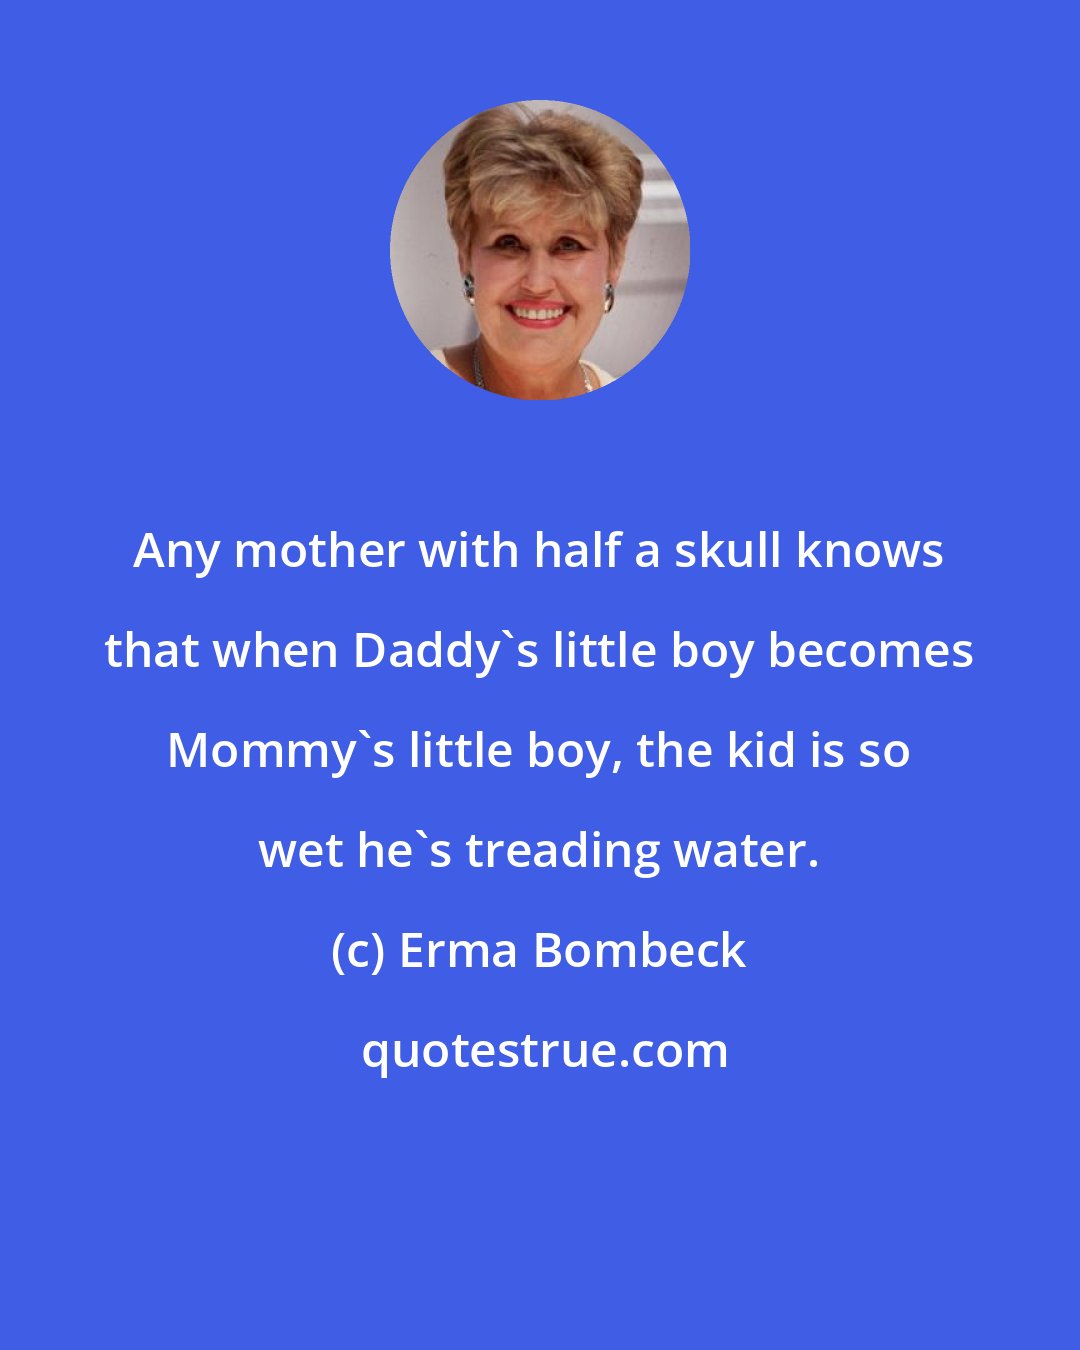 Erma Bombeck: Any mother with half a skull knows that when Daddy's little boy becomes Mommy's little boy, the kid is so wet he's treading water.